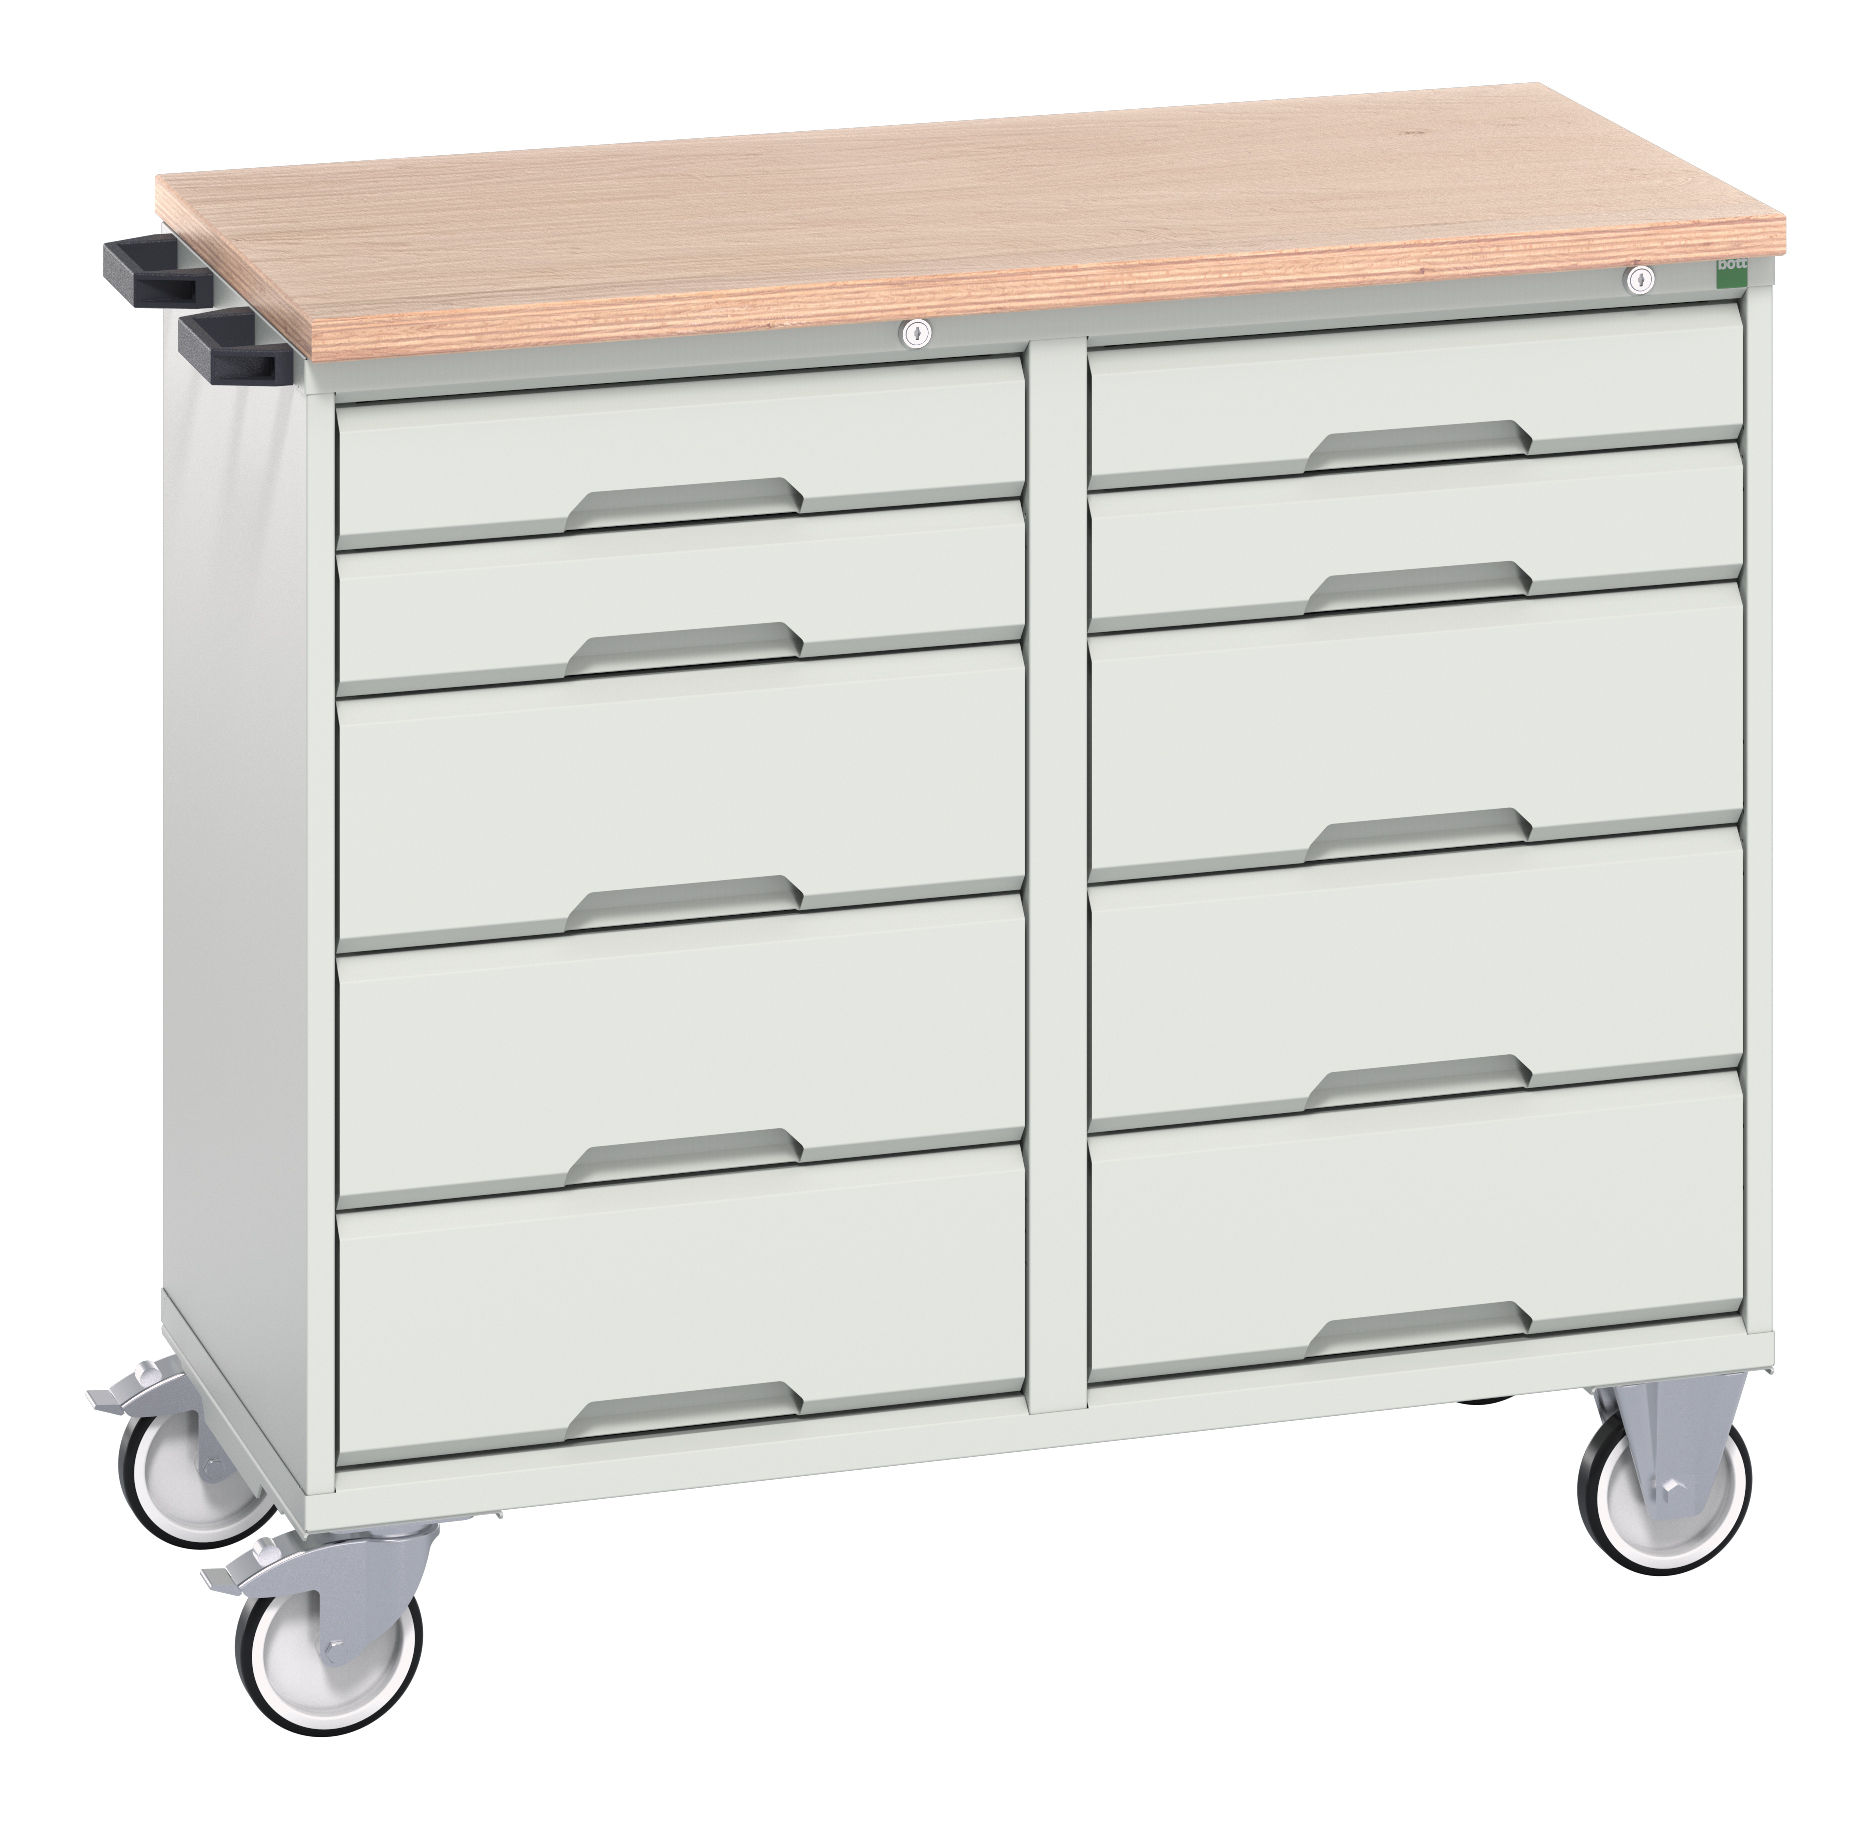 Bott Verso Maintenance Trolley With 10 Drawers & Multiplex Top - 16927101.16